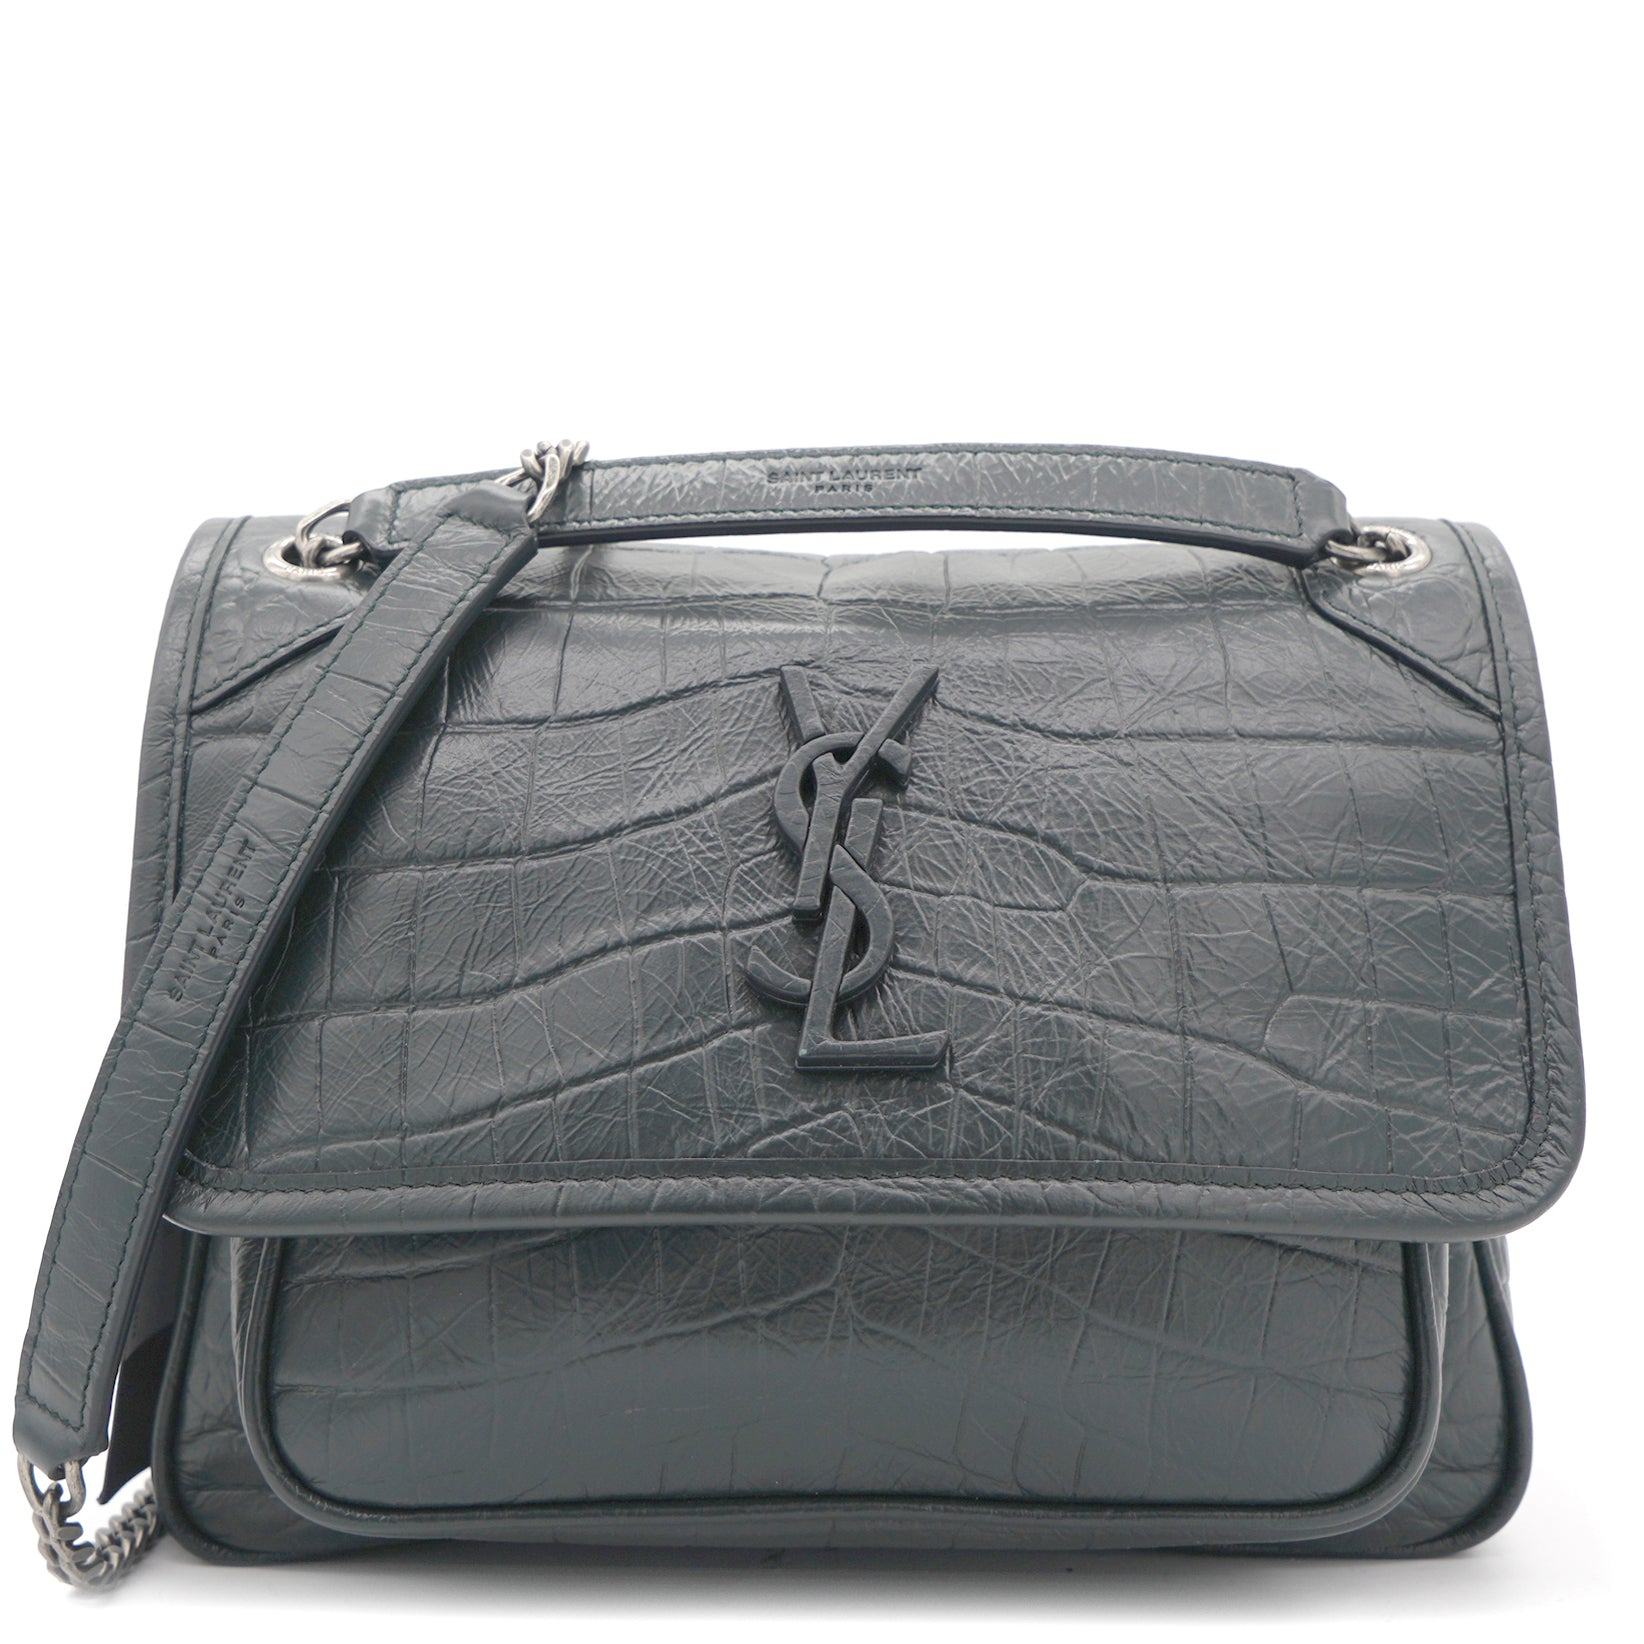 Saint Laurent Large Niki Chain Bag in Crinkled and Quilted Black Leather